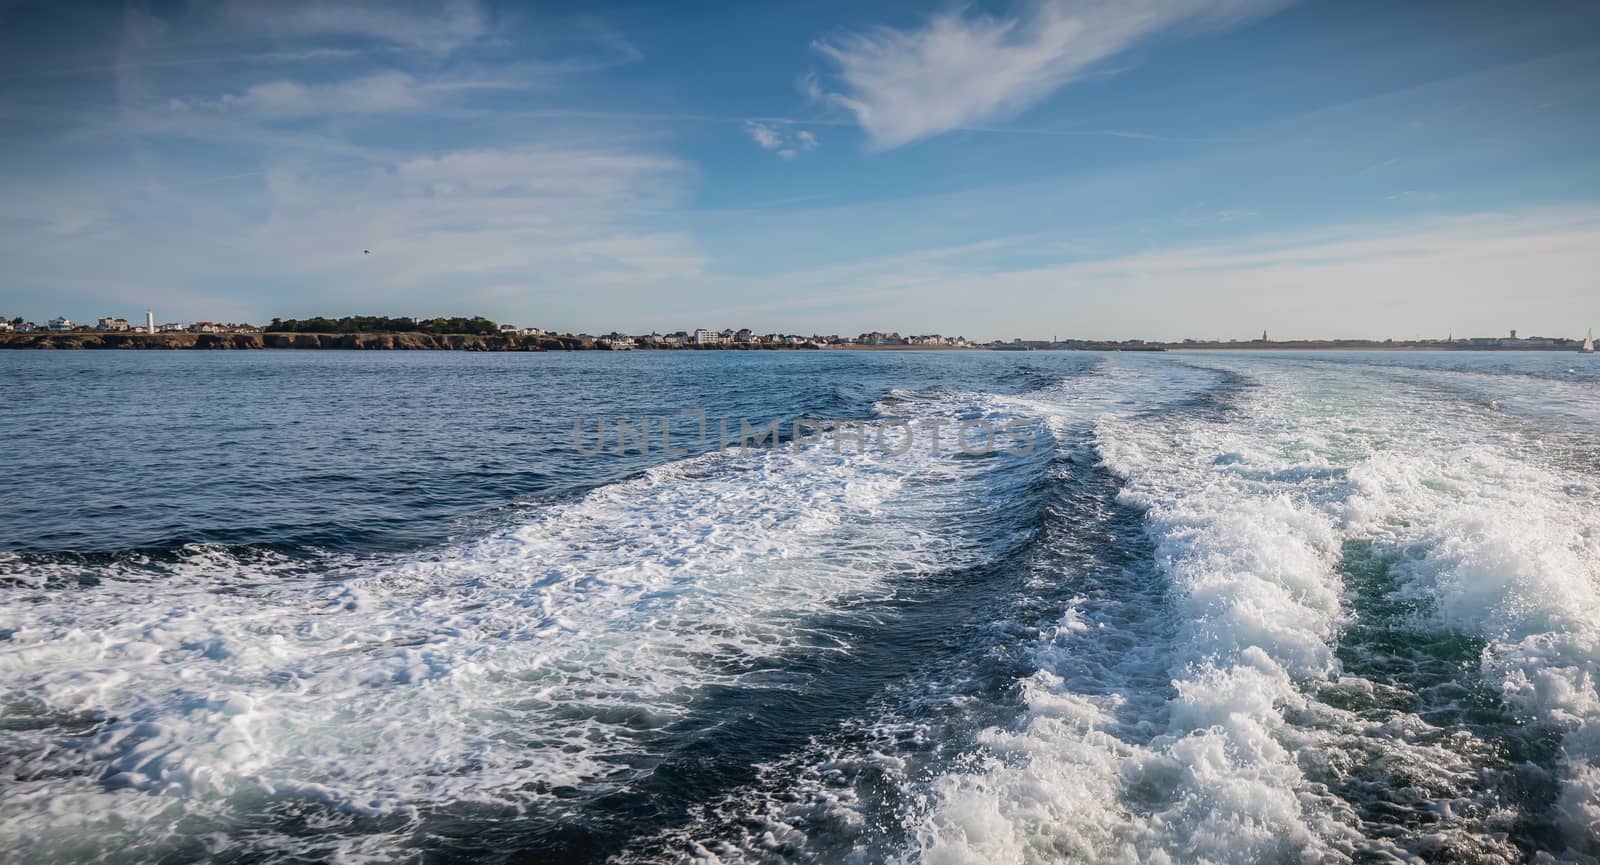 view of water jet seen behind the speed boat